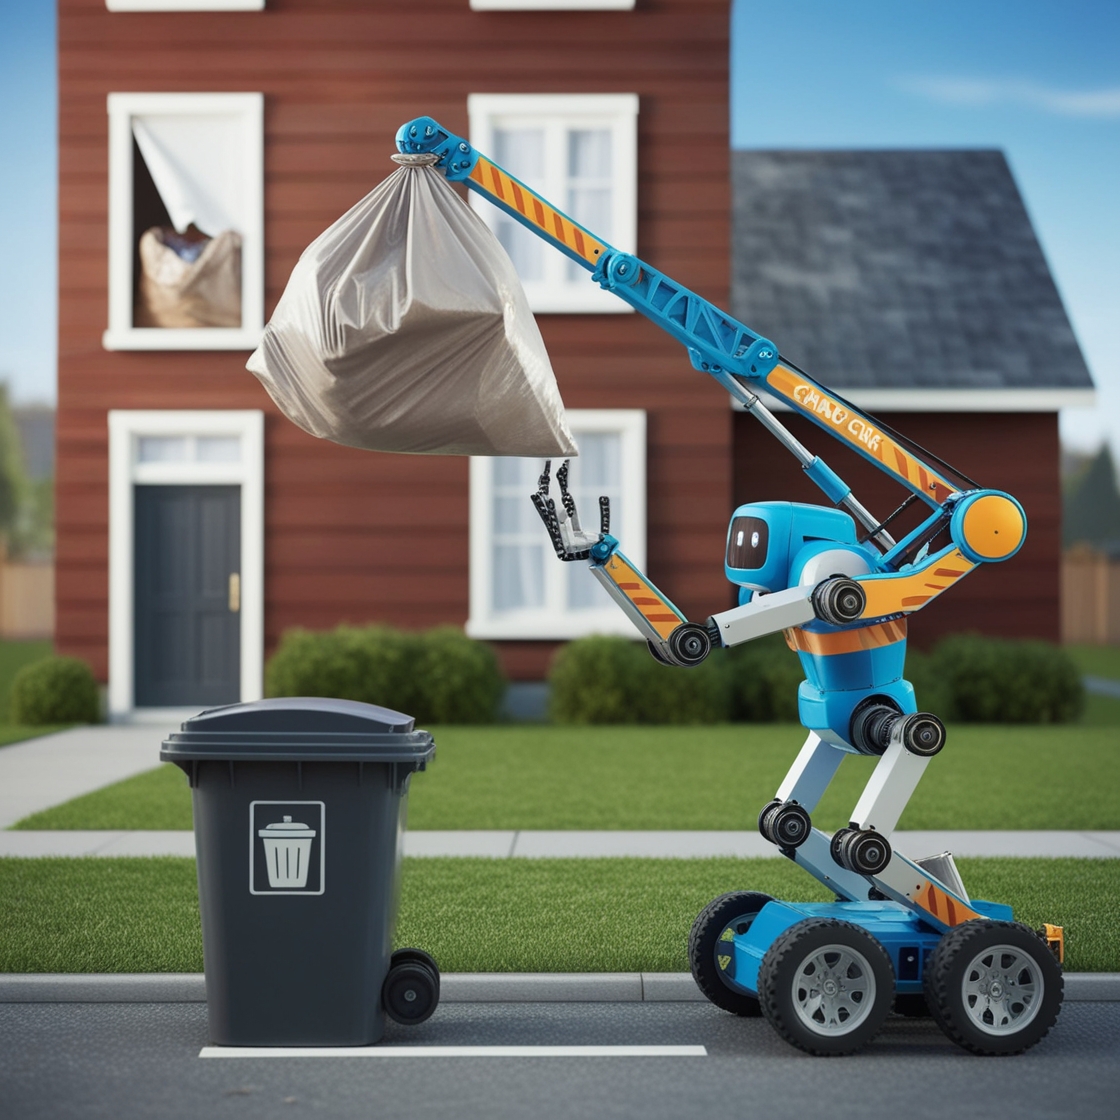 Default_Create_a_crane_robot_that_takes_down_a_garbage_bag_fro_1.jpg